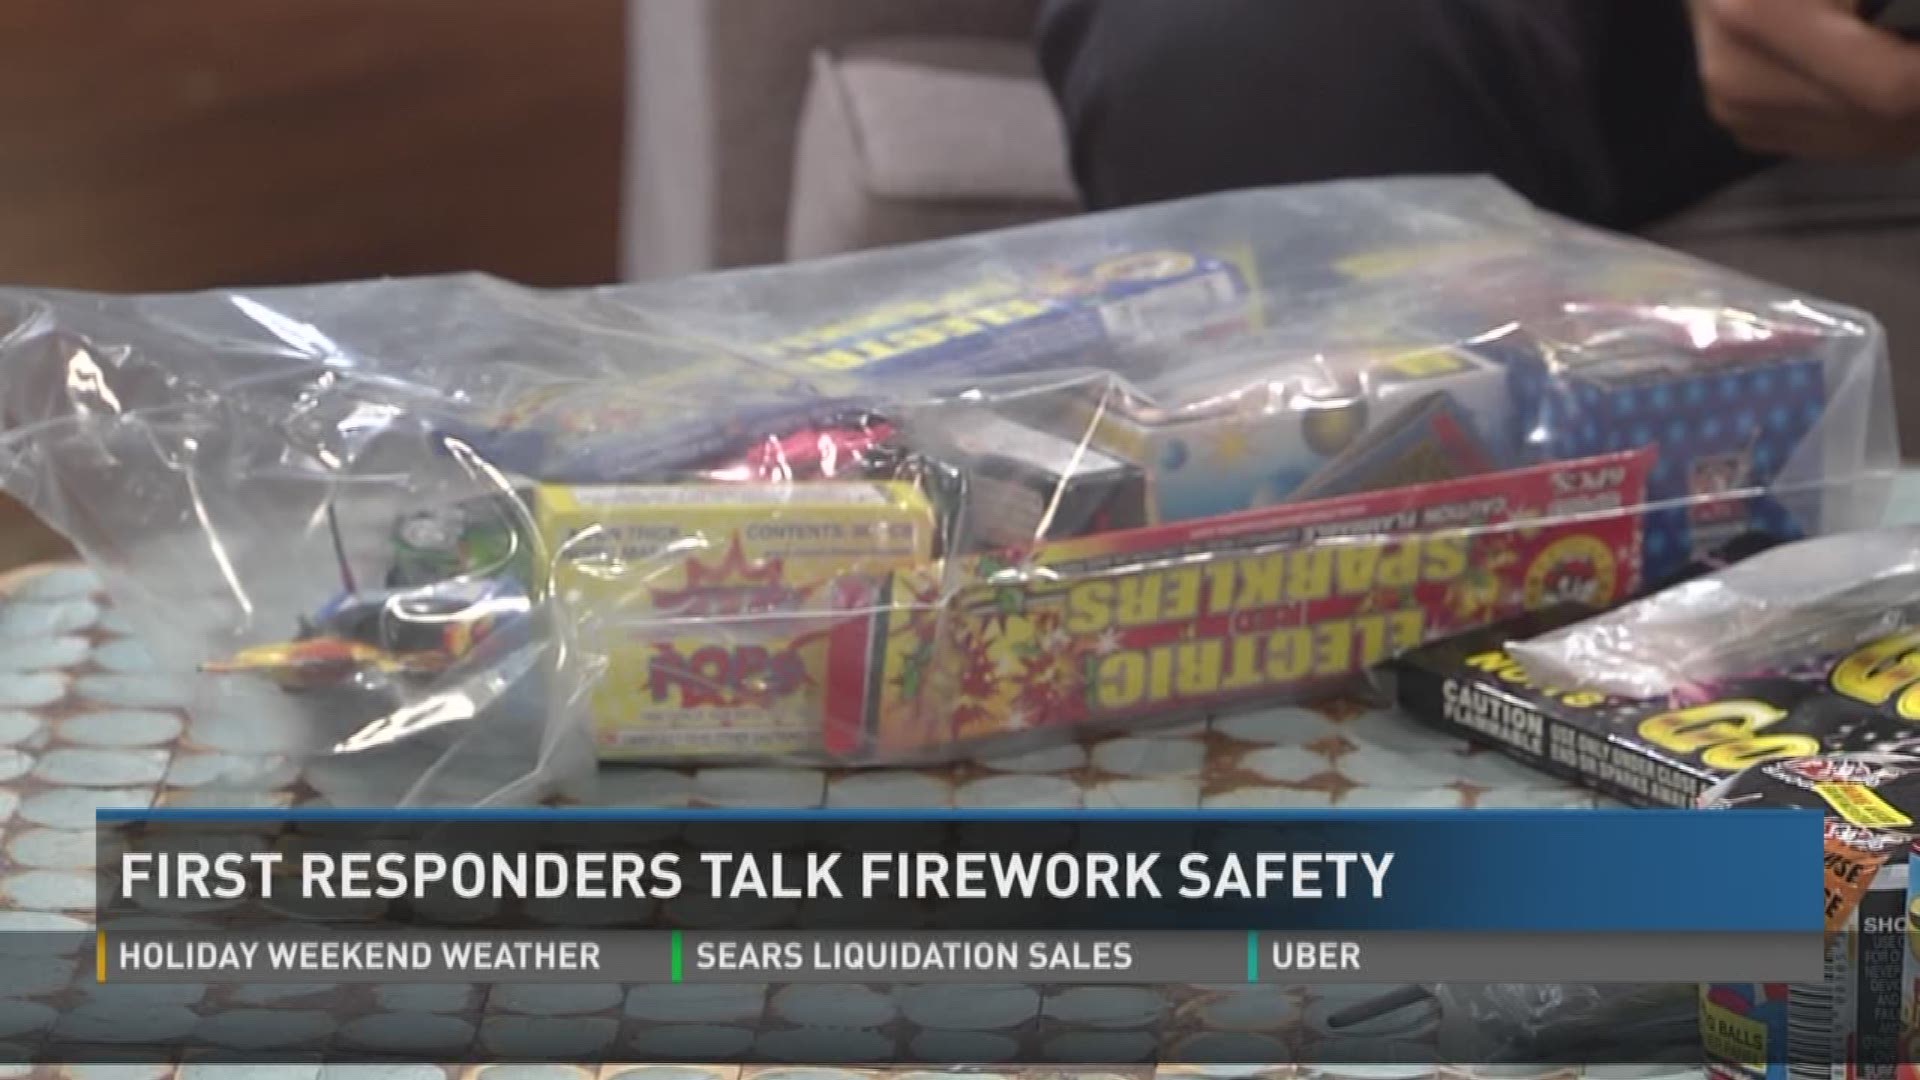 Every year thousands of people are hurt while improperly using fireworks. First responders talk rules and safety regarding them.